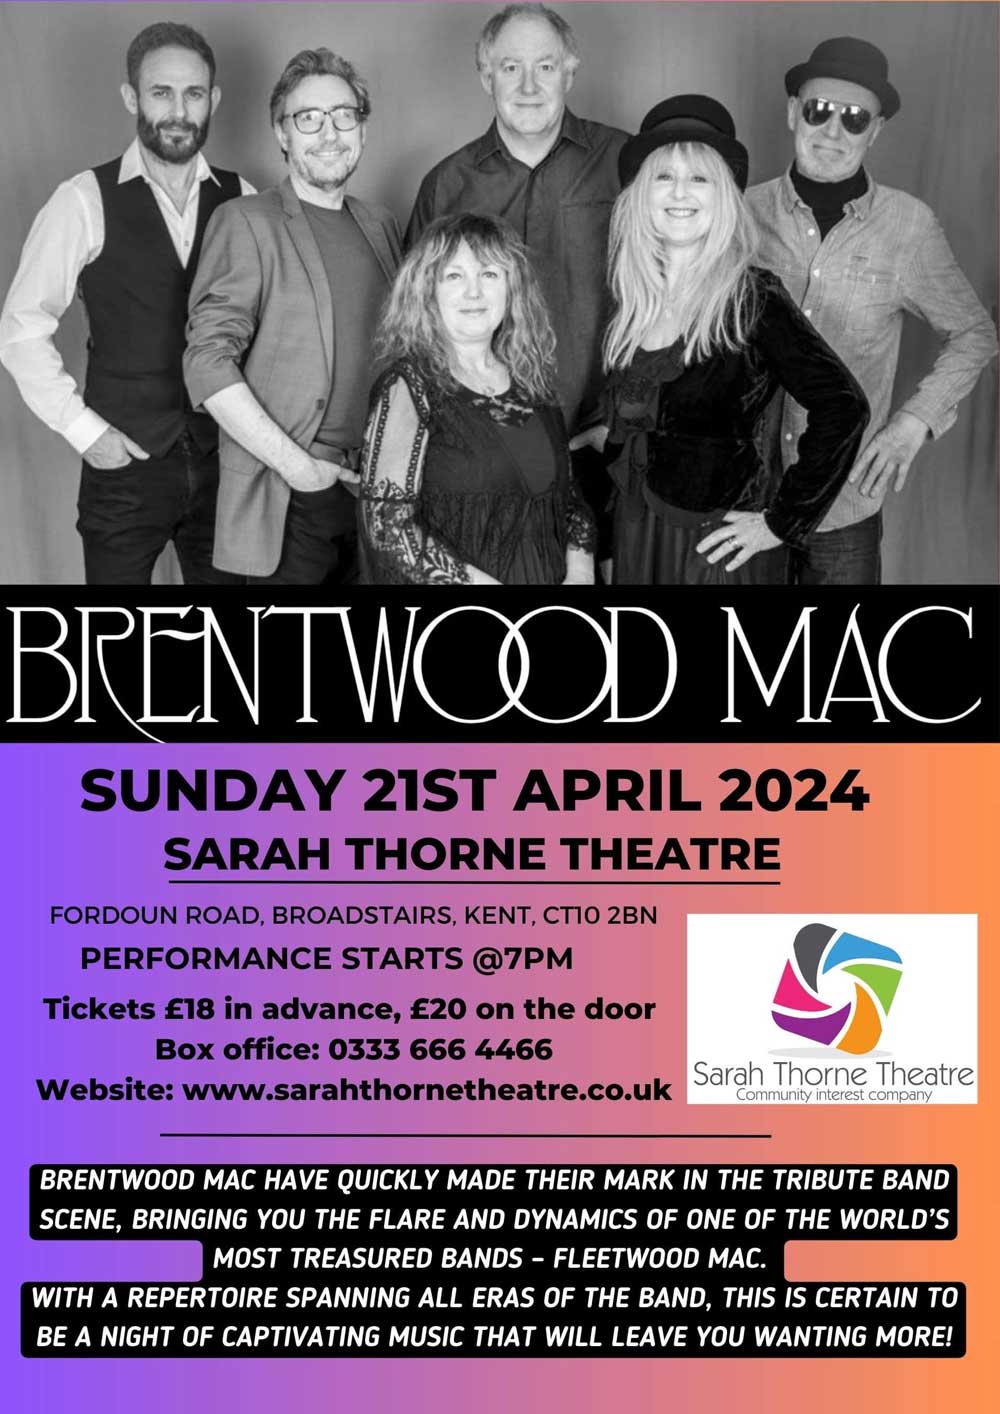 Image of Sarah Thorne Theatre event - Brentwood Mac